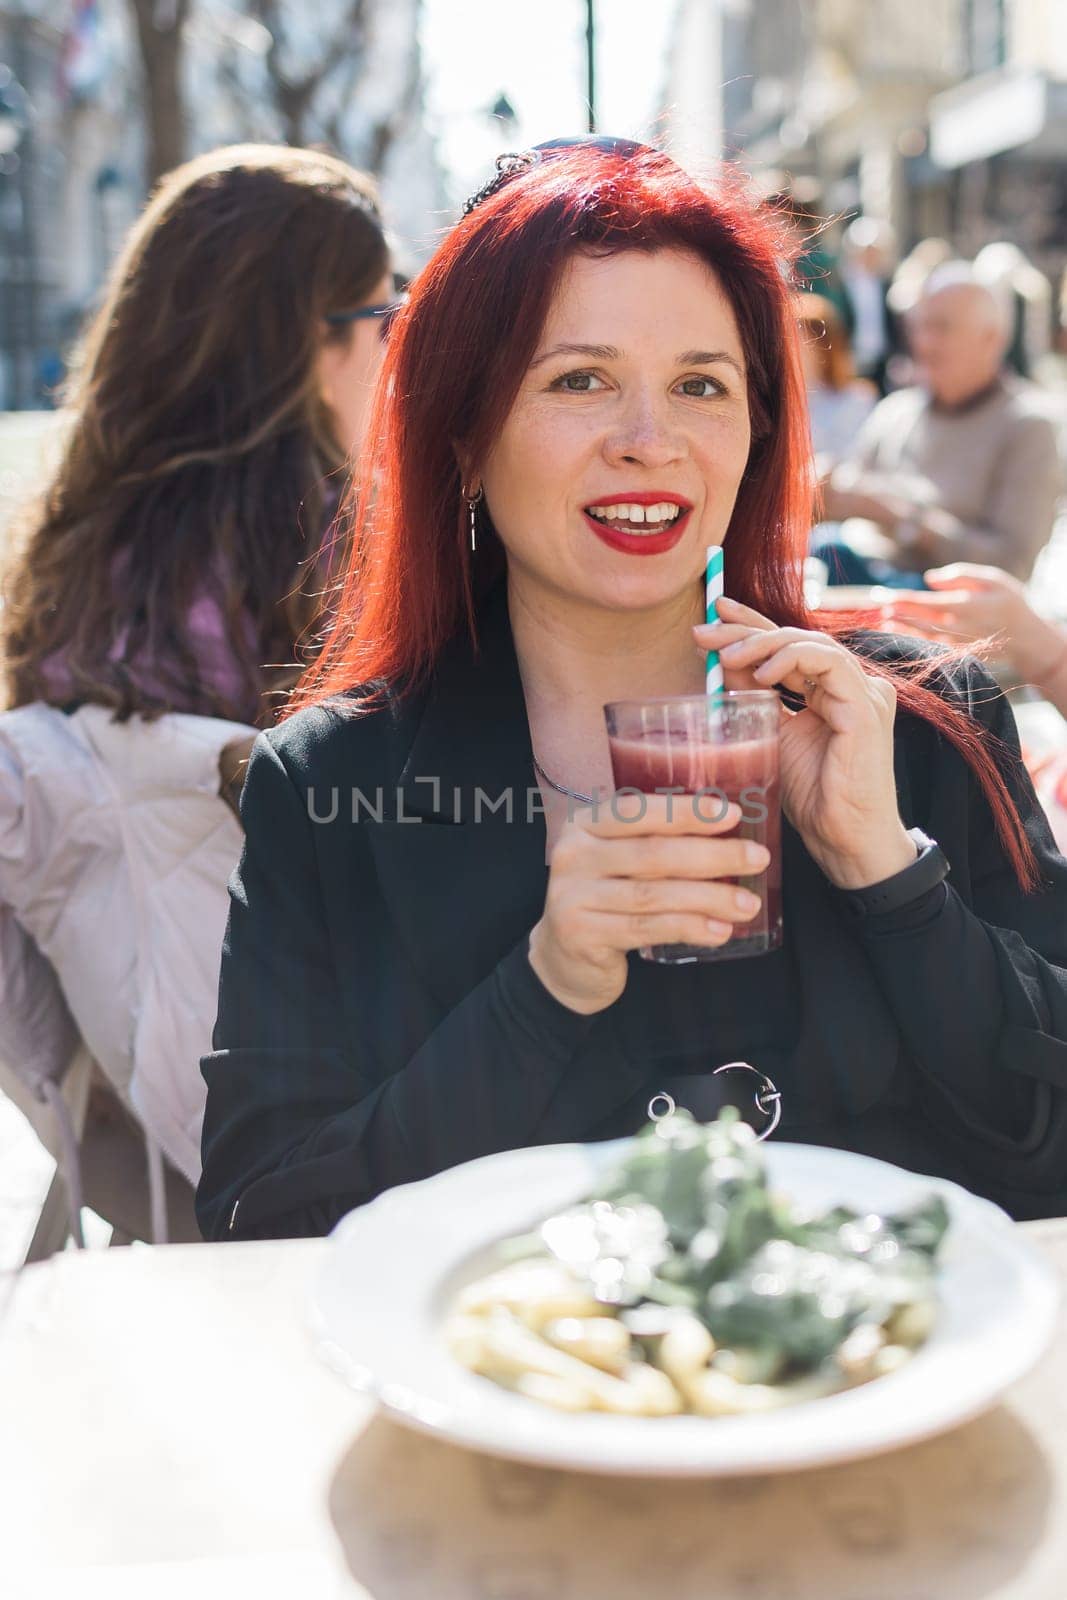 Beautiful happy woman with long red hair enjoying cocktail in a street cafe by Satura86